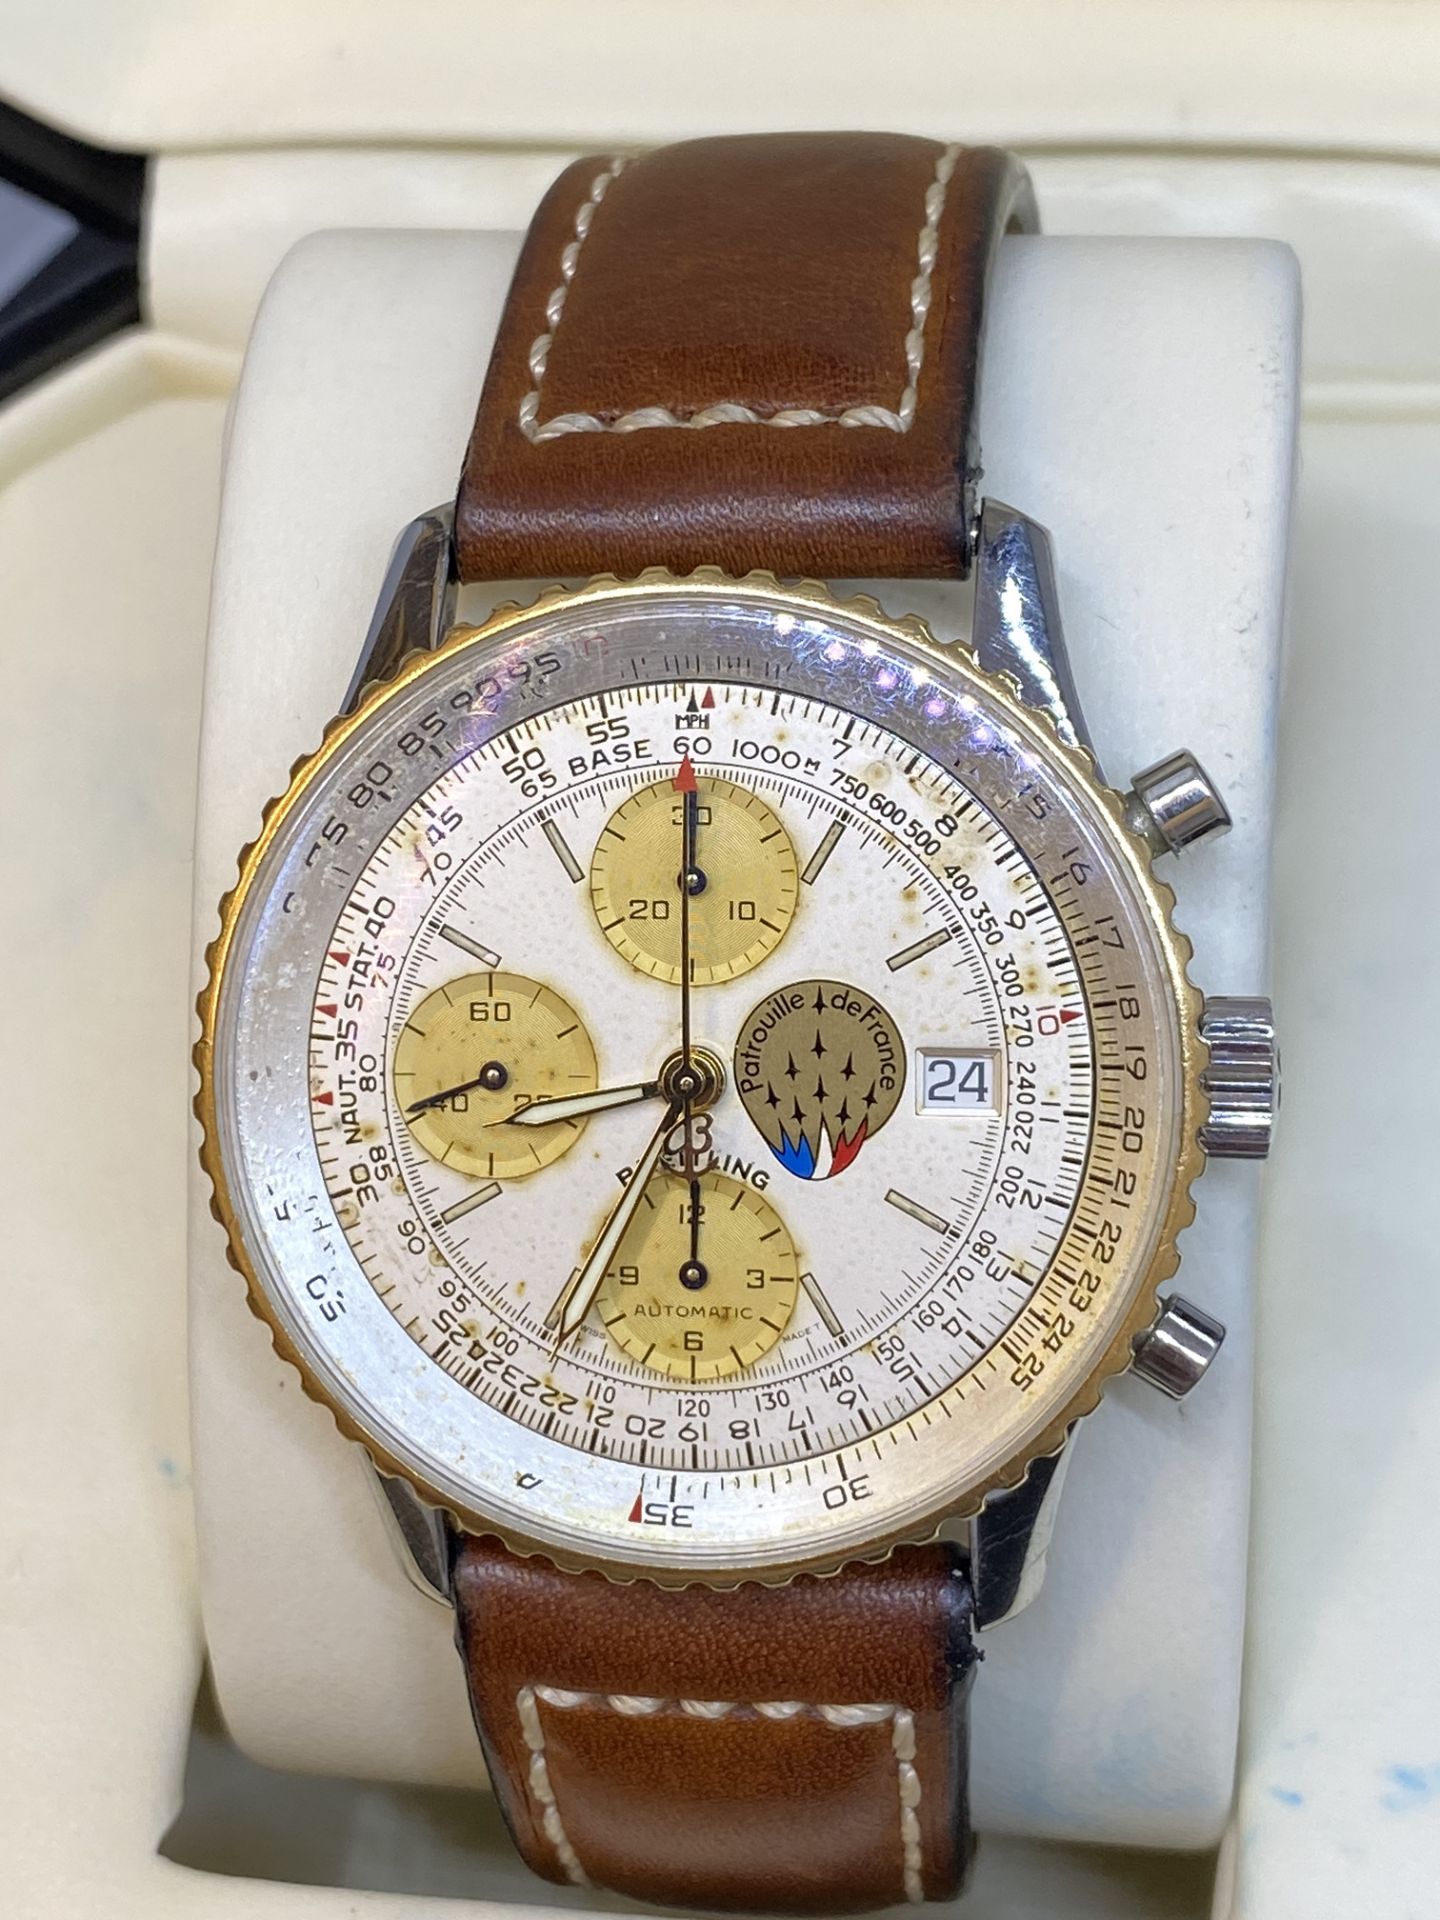 Breitling Navitimer Chronograph Watch with Box - Image 4 of 14